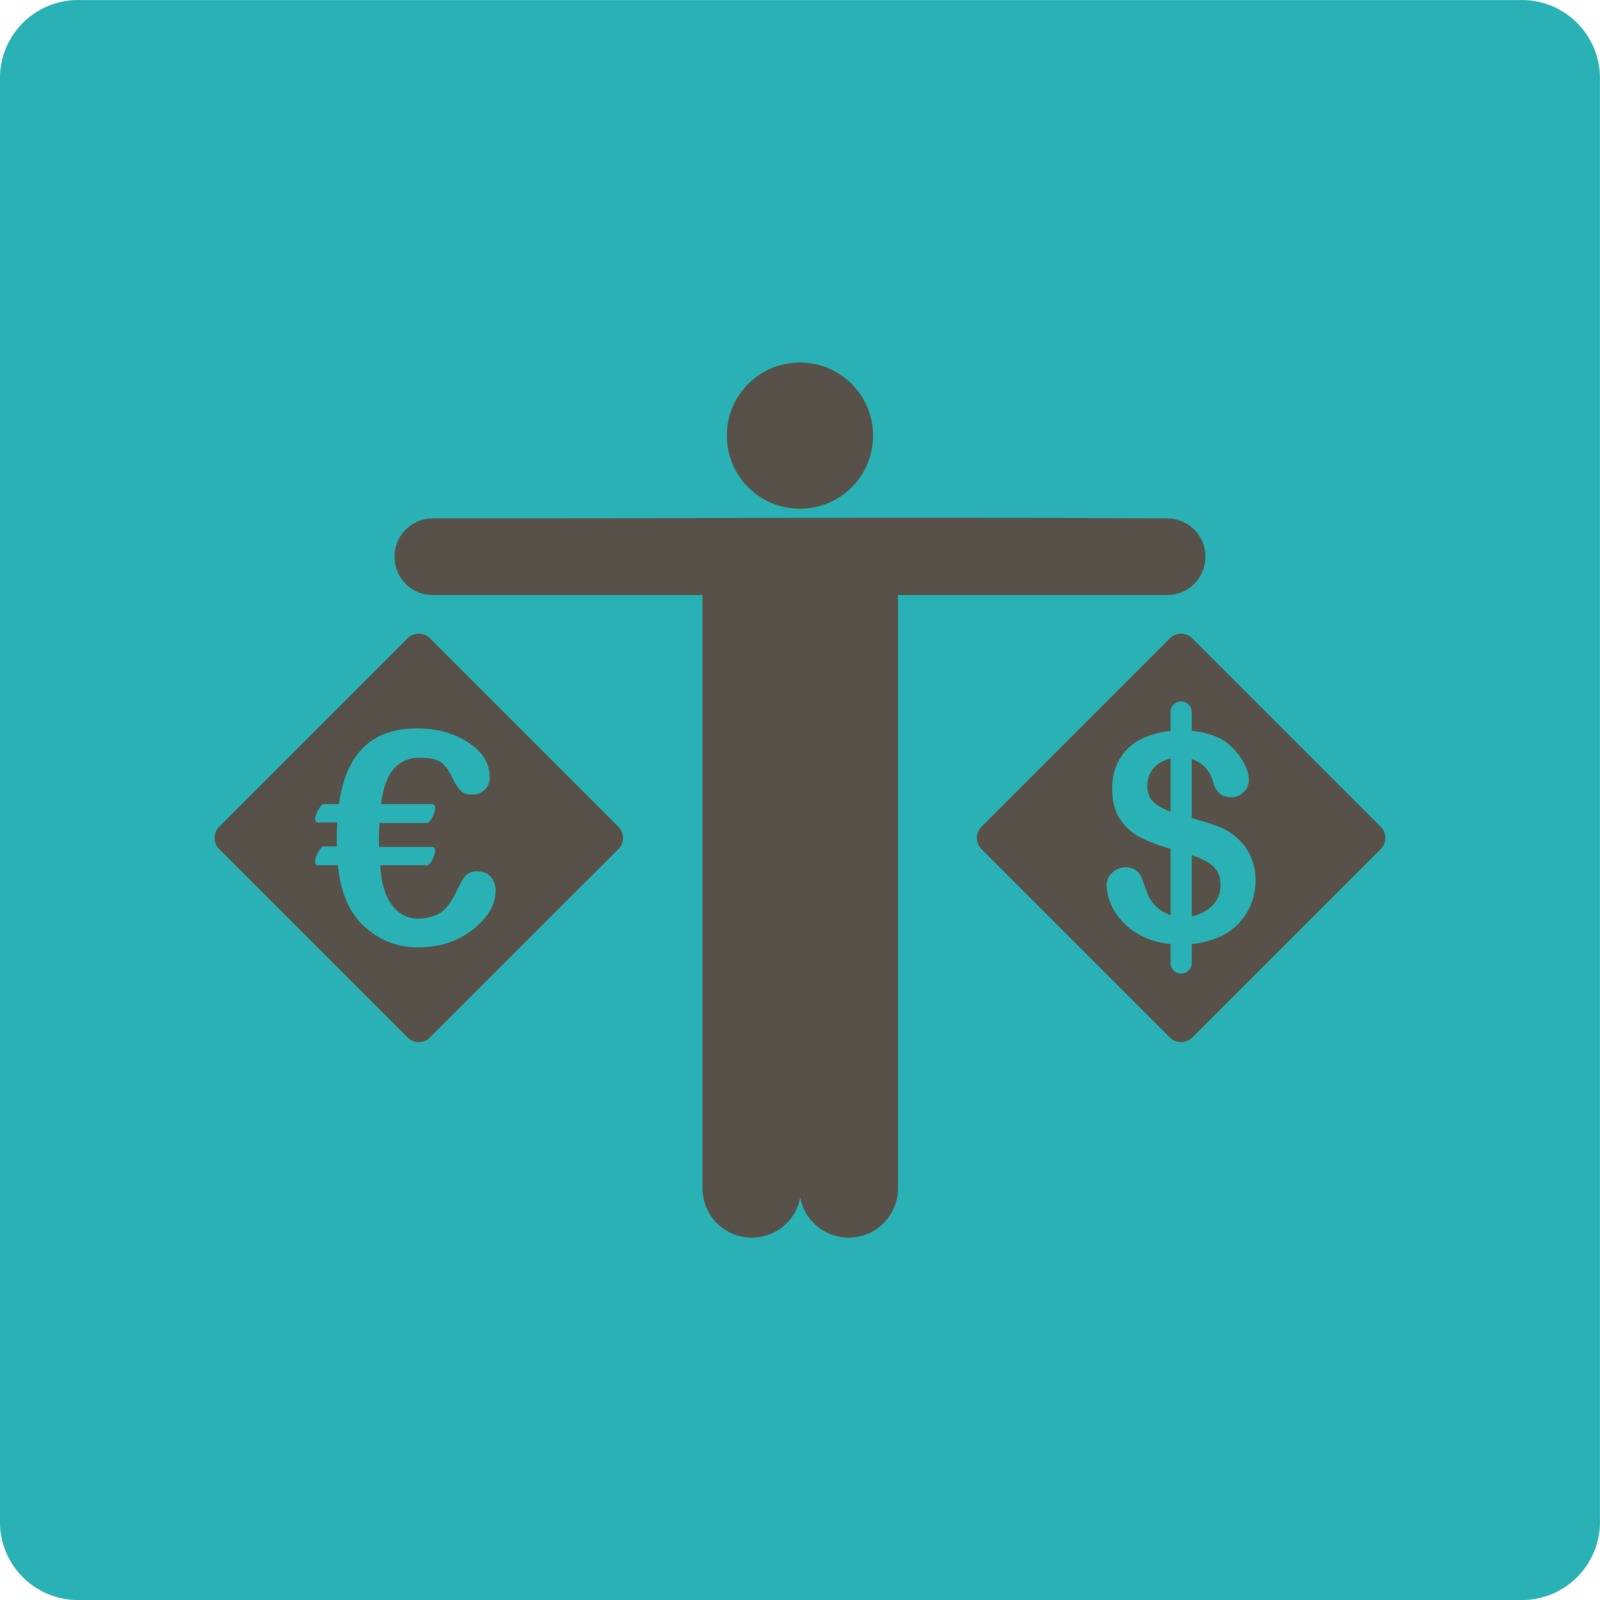 Currency compare icon. Vector style is grey and cyan colors, flat rounded square button on a white background.